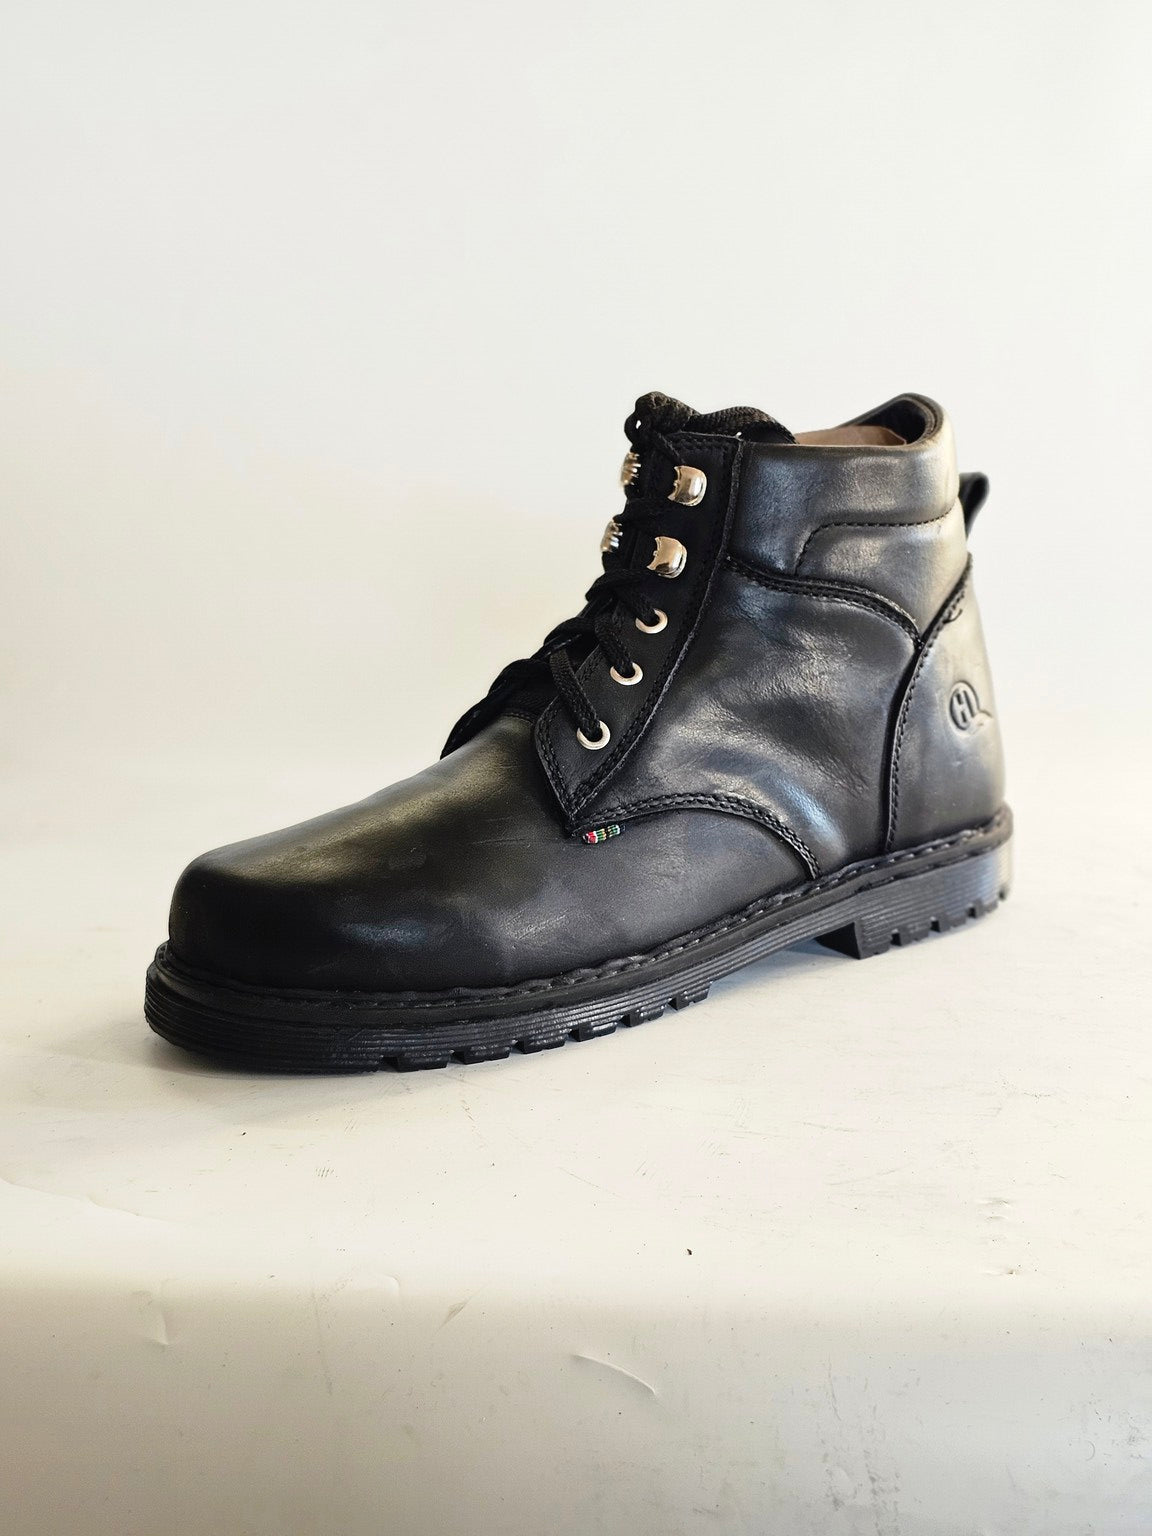 Parker Retro Work Boots - Hello Quality Collection